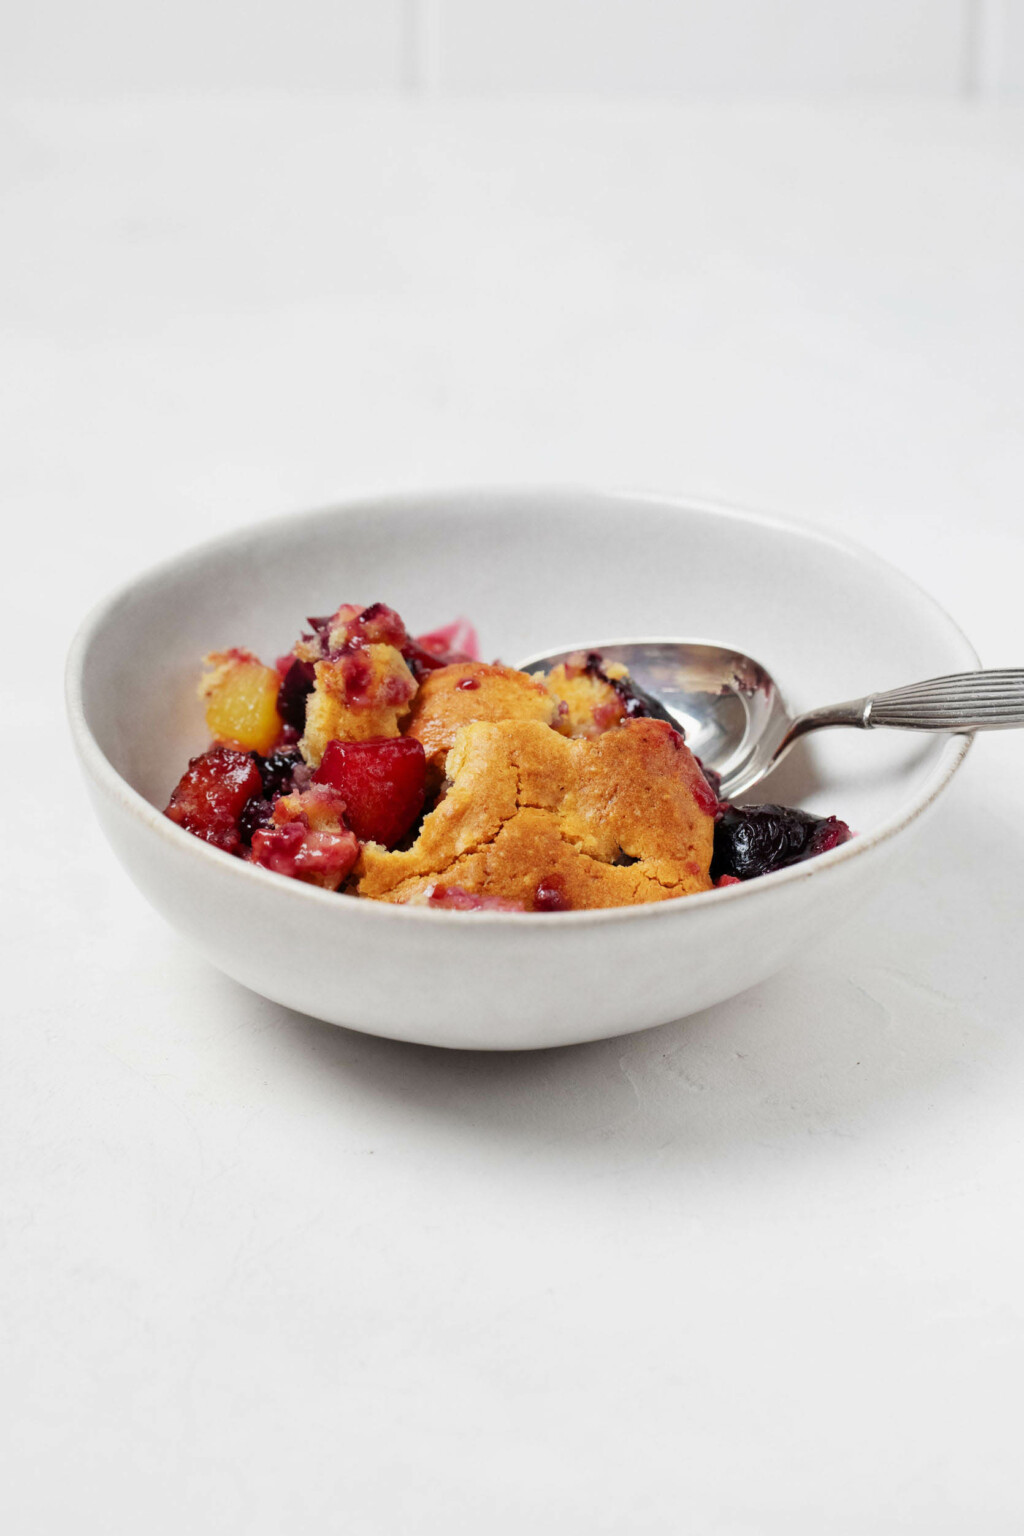 A white, small bowl is filled with a peach and cherry cobbler and soft, cake-like topping. There is a silver spoon resting in the dish, and the dish is on a white surface.